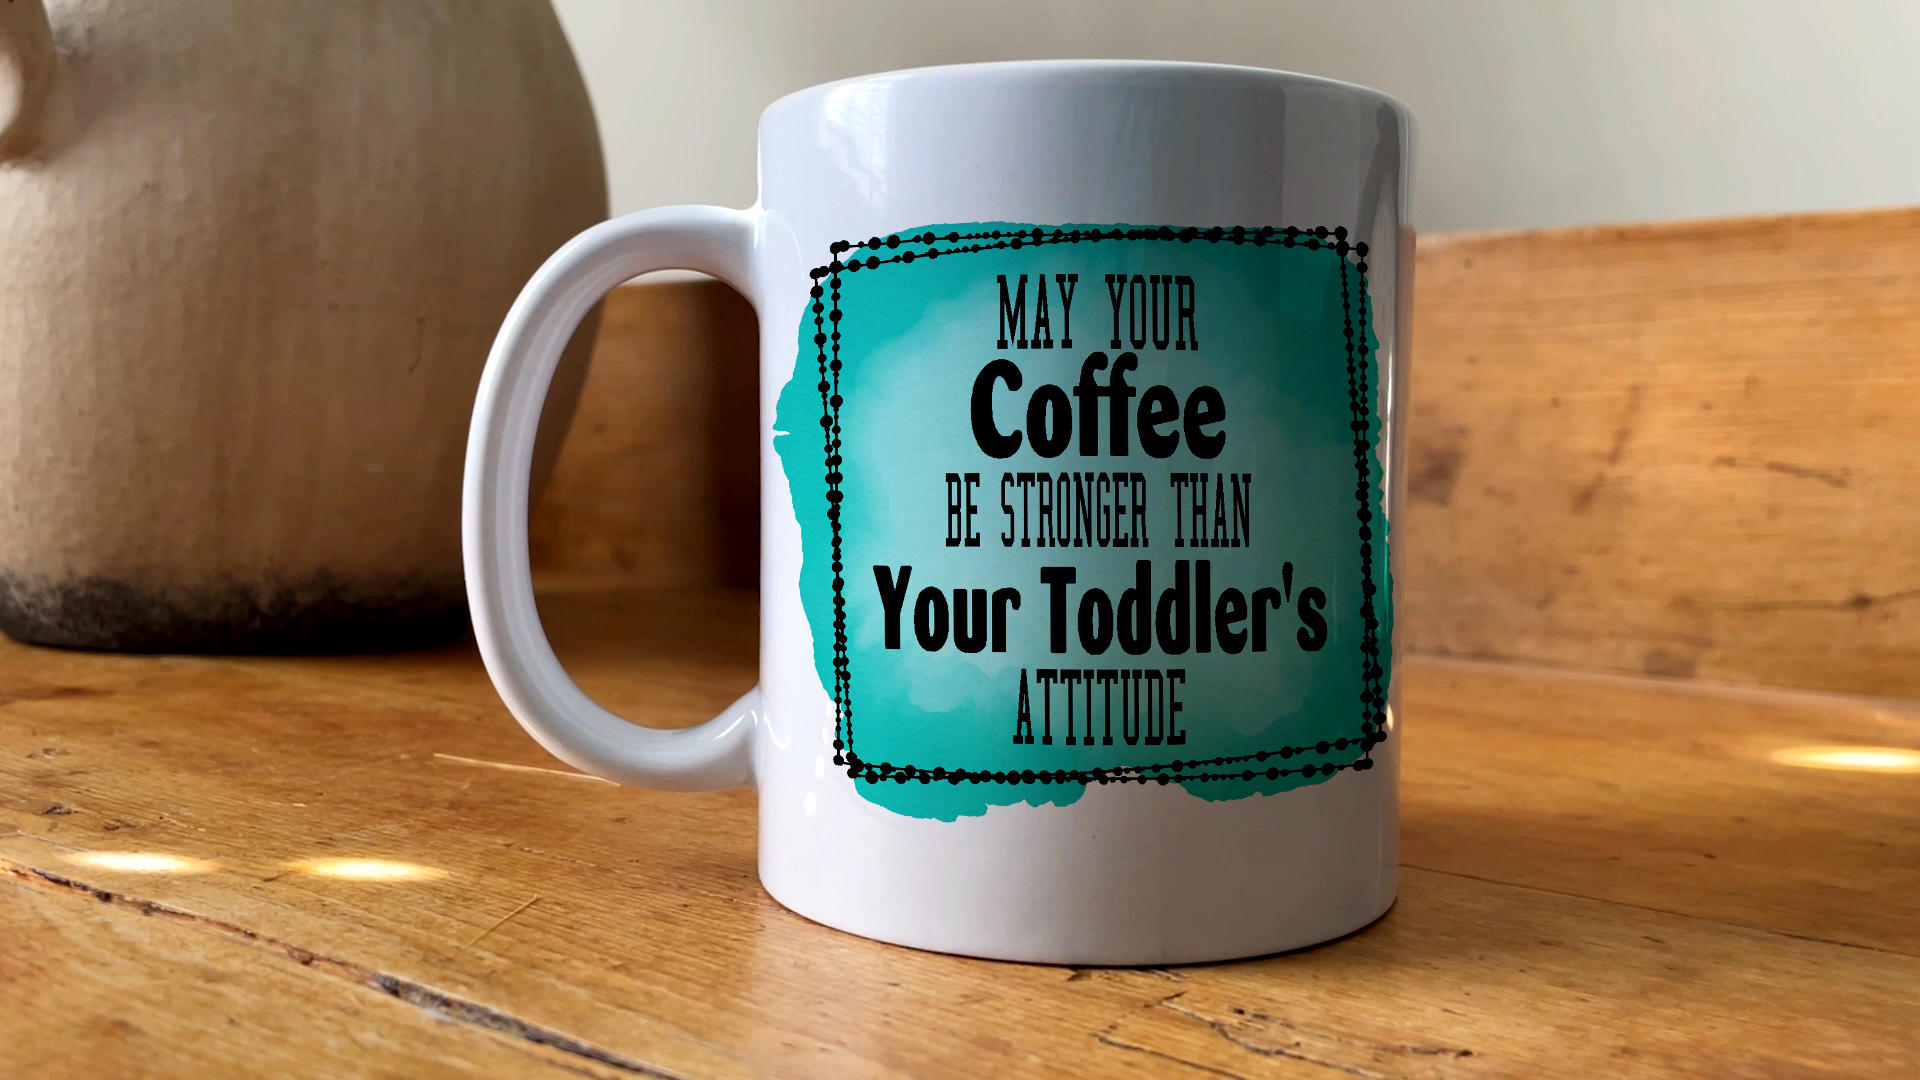 may your coffee be stronger than your toddler' Travel Mug